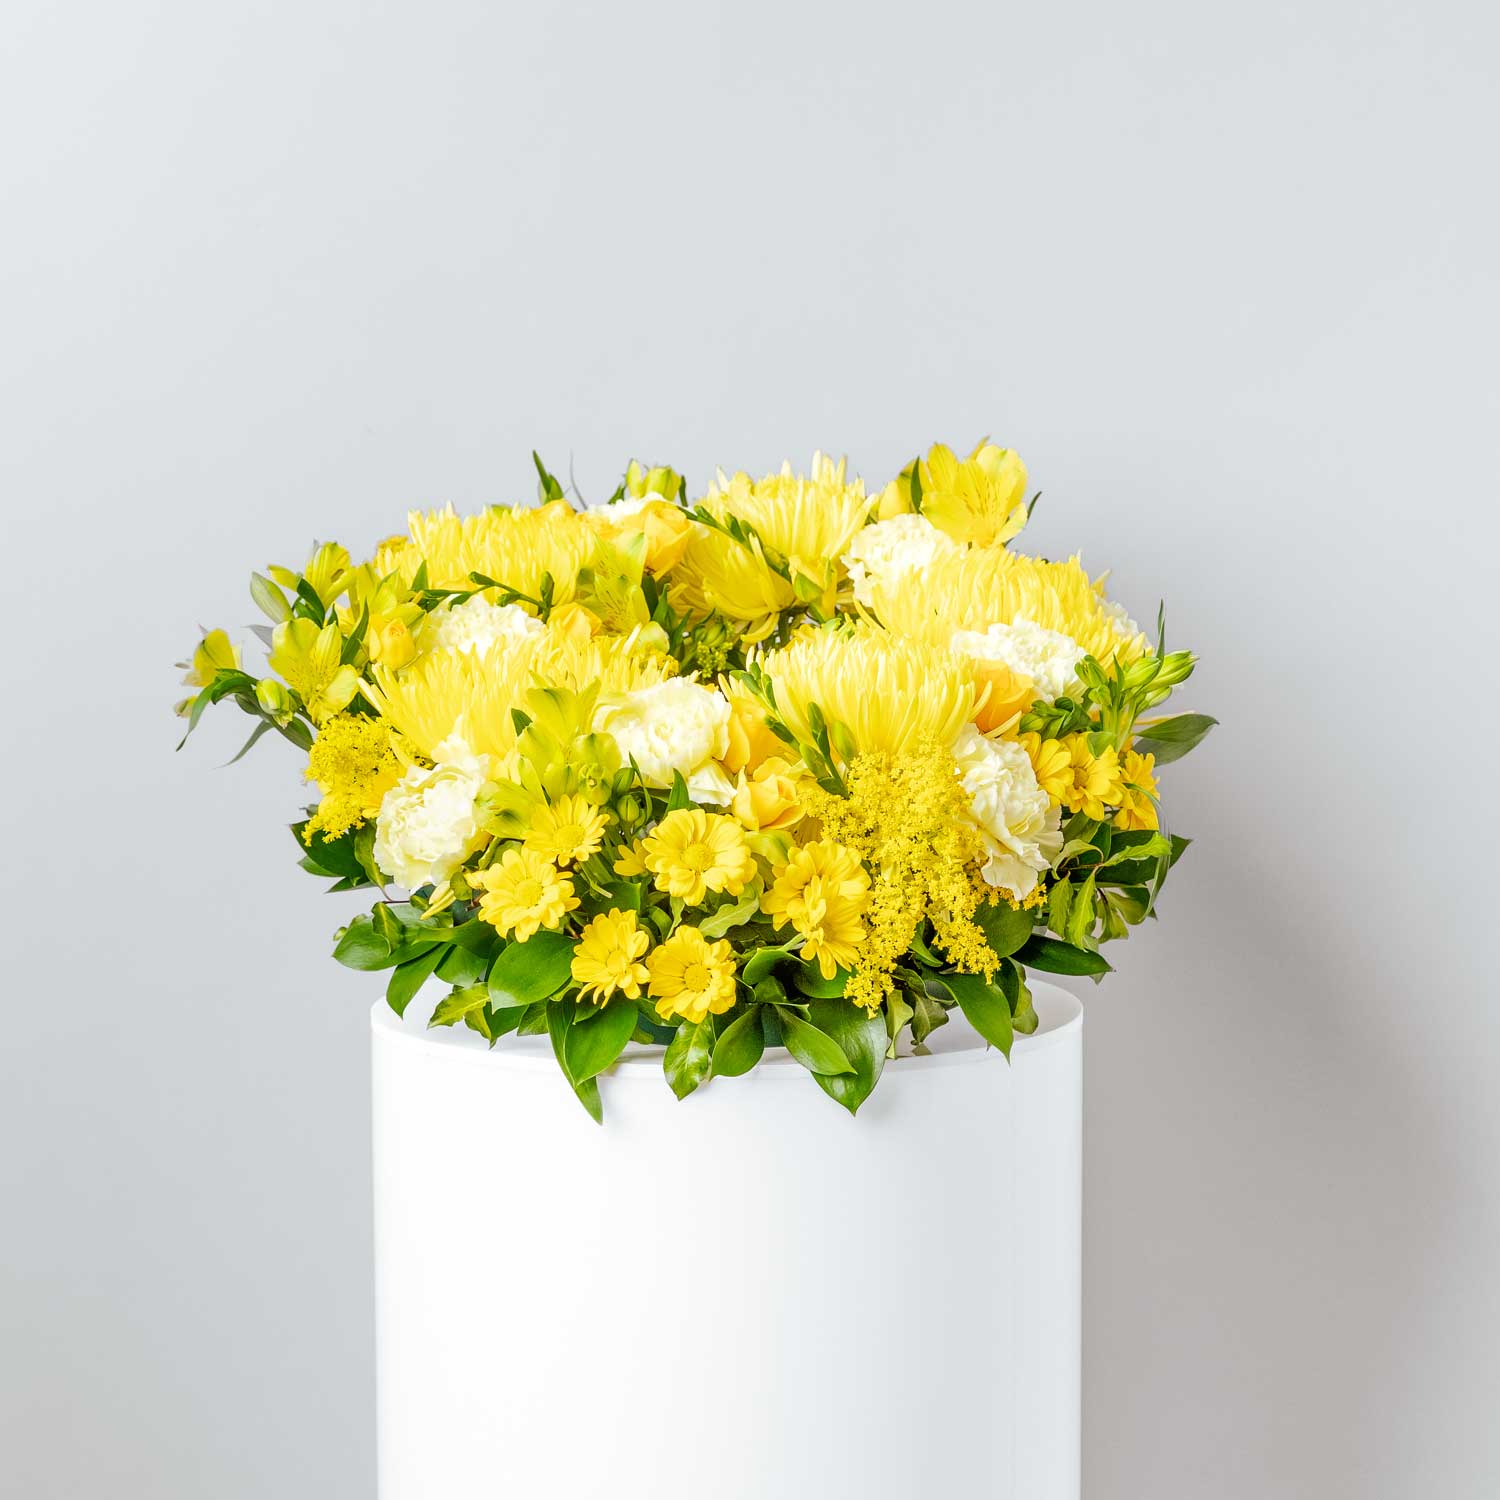 funeral wreath made with bright yellow flowers including roses carnations chrysanthemums freesia golden rod alstromeria created into a circular shape